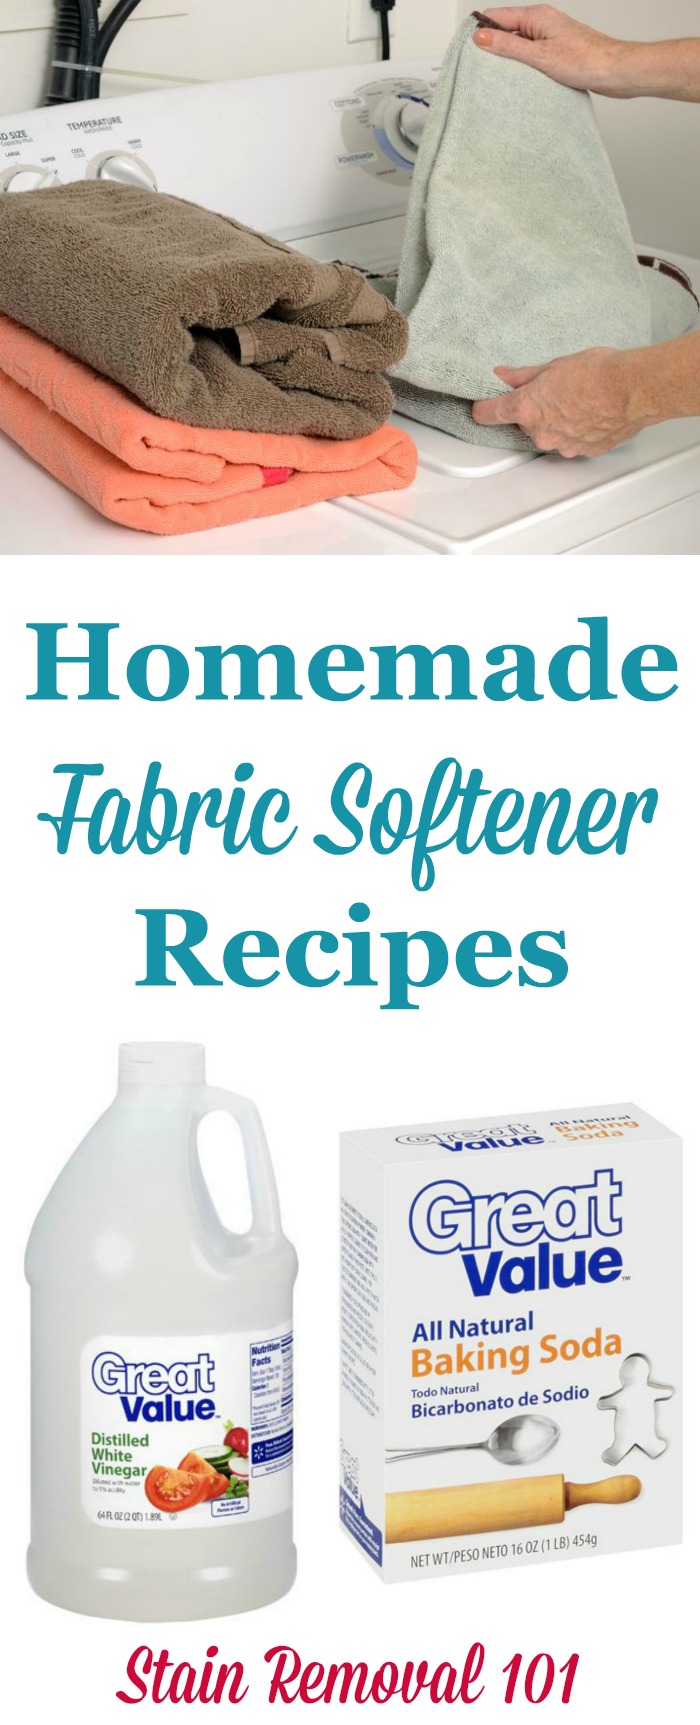 Two homemade fabric softener recipes which are natural and frugal, one of which is for your washing machine, and another for your dryer {on Stain Removal 101}